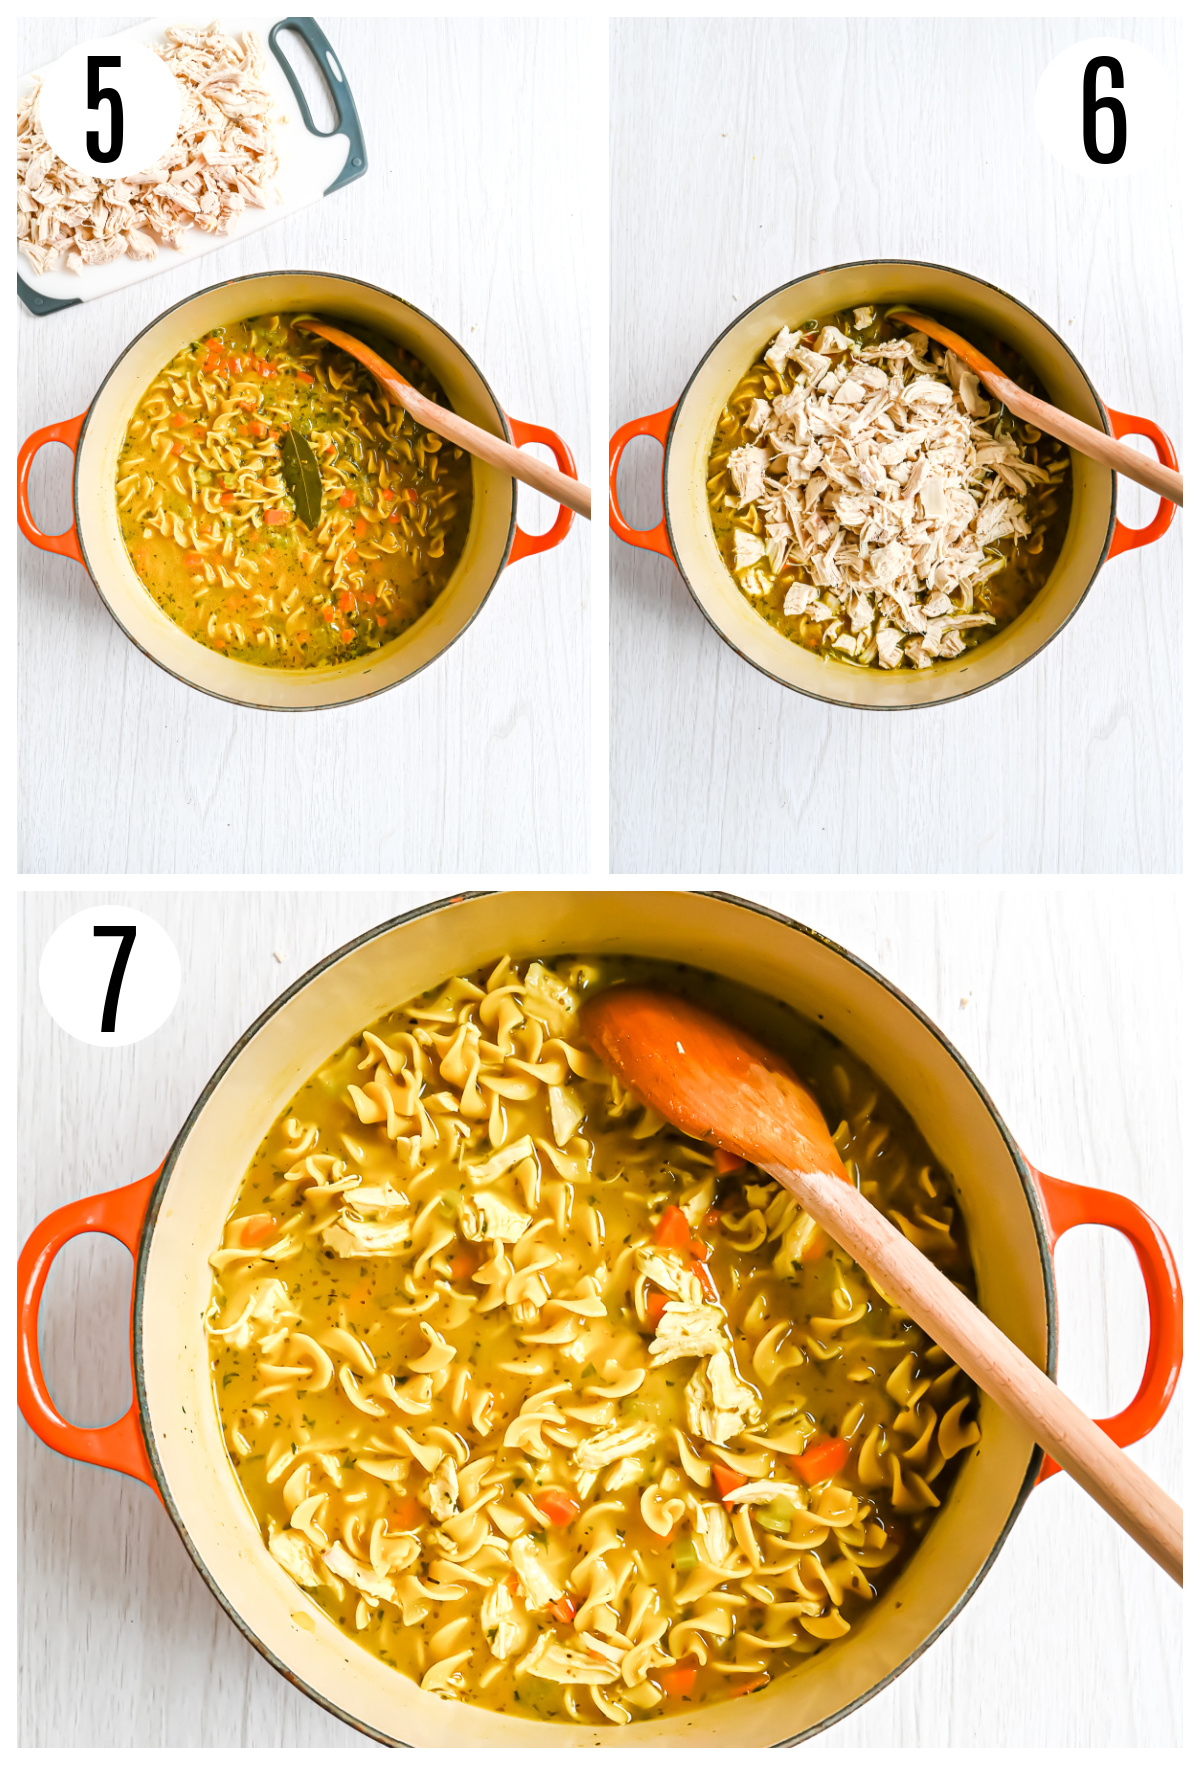 The next steps in making this soup recipe include cooking the noodles, adding the chicken back into the pot and stirring to combine.